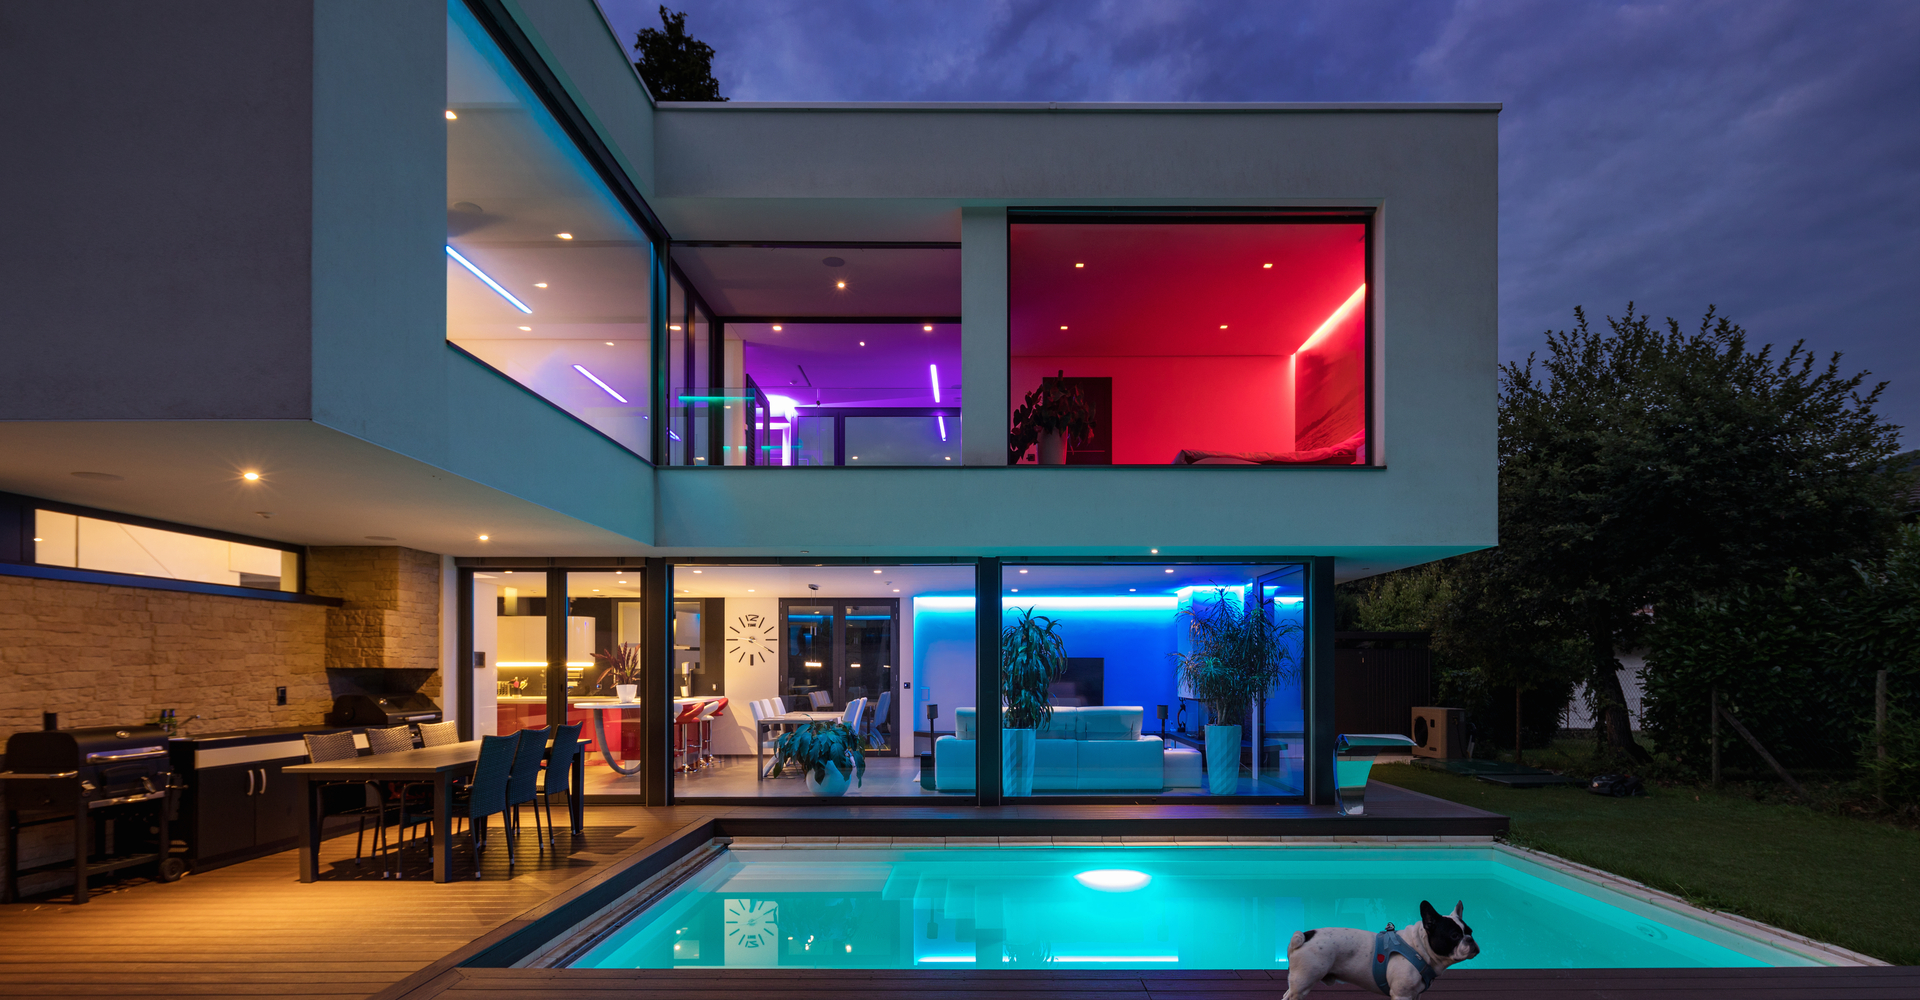 A modern house with a pool and colorful lights equipped with external LED lighting to keep the party going.